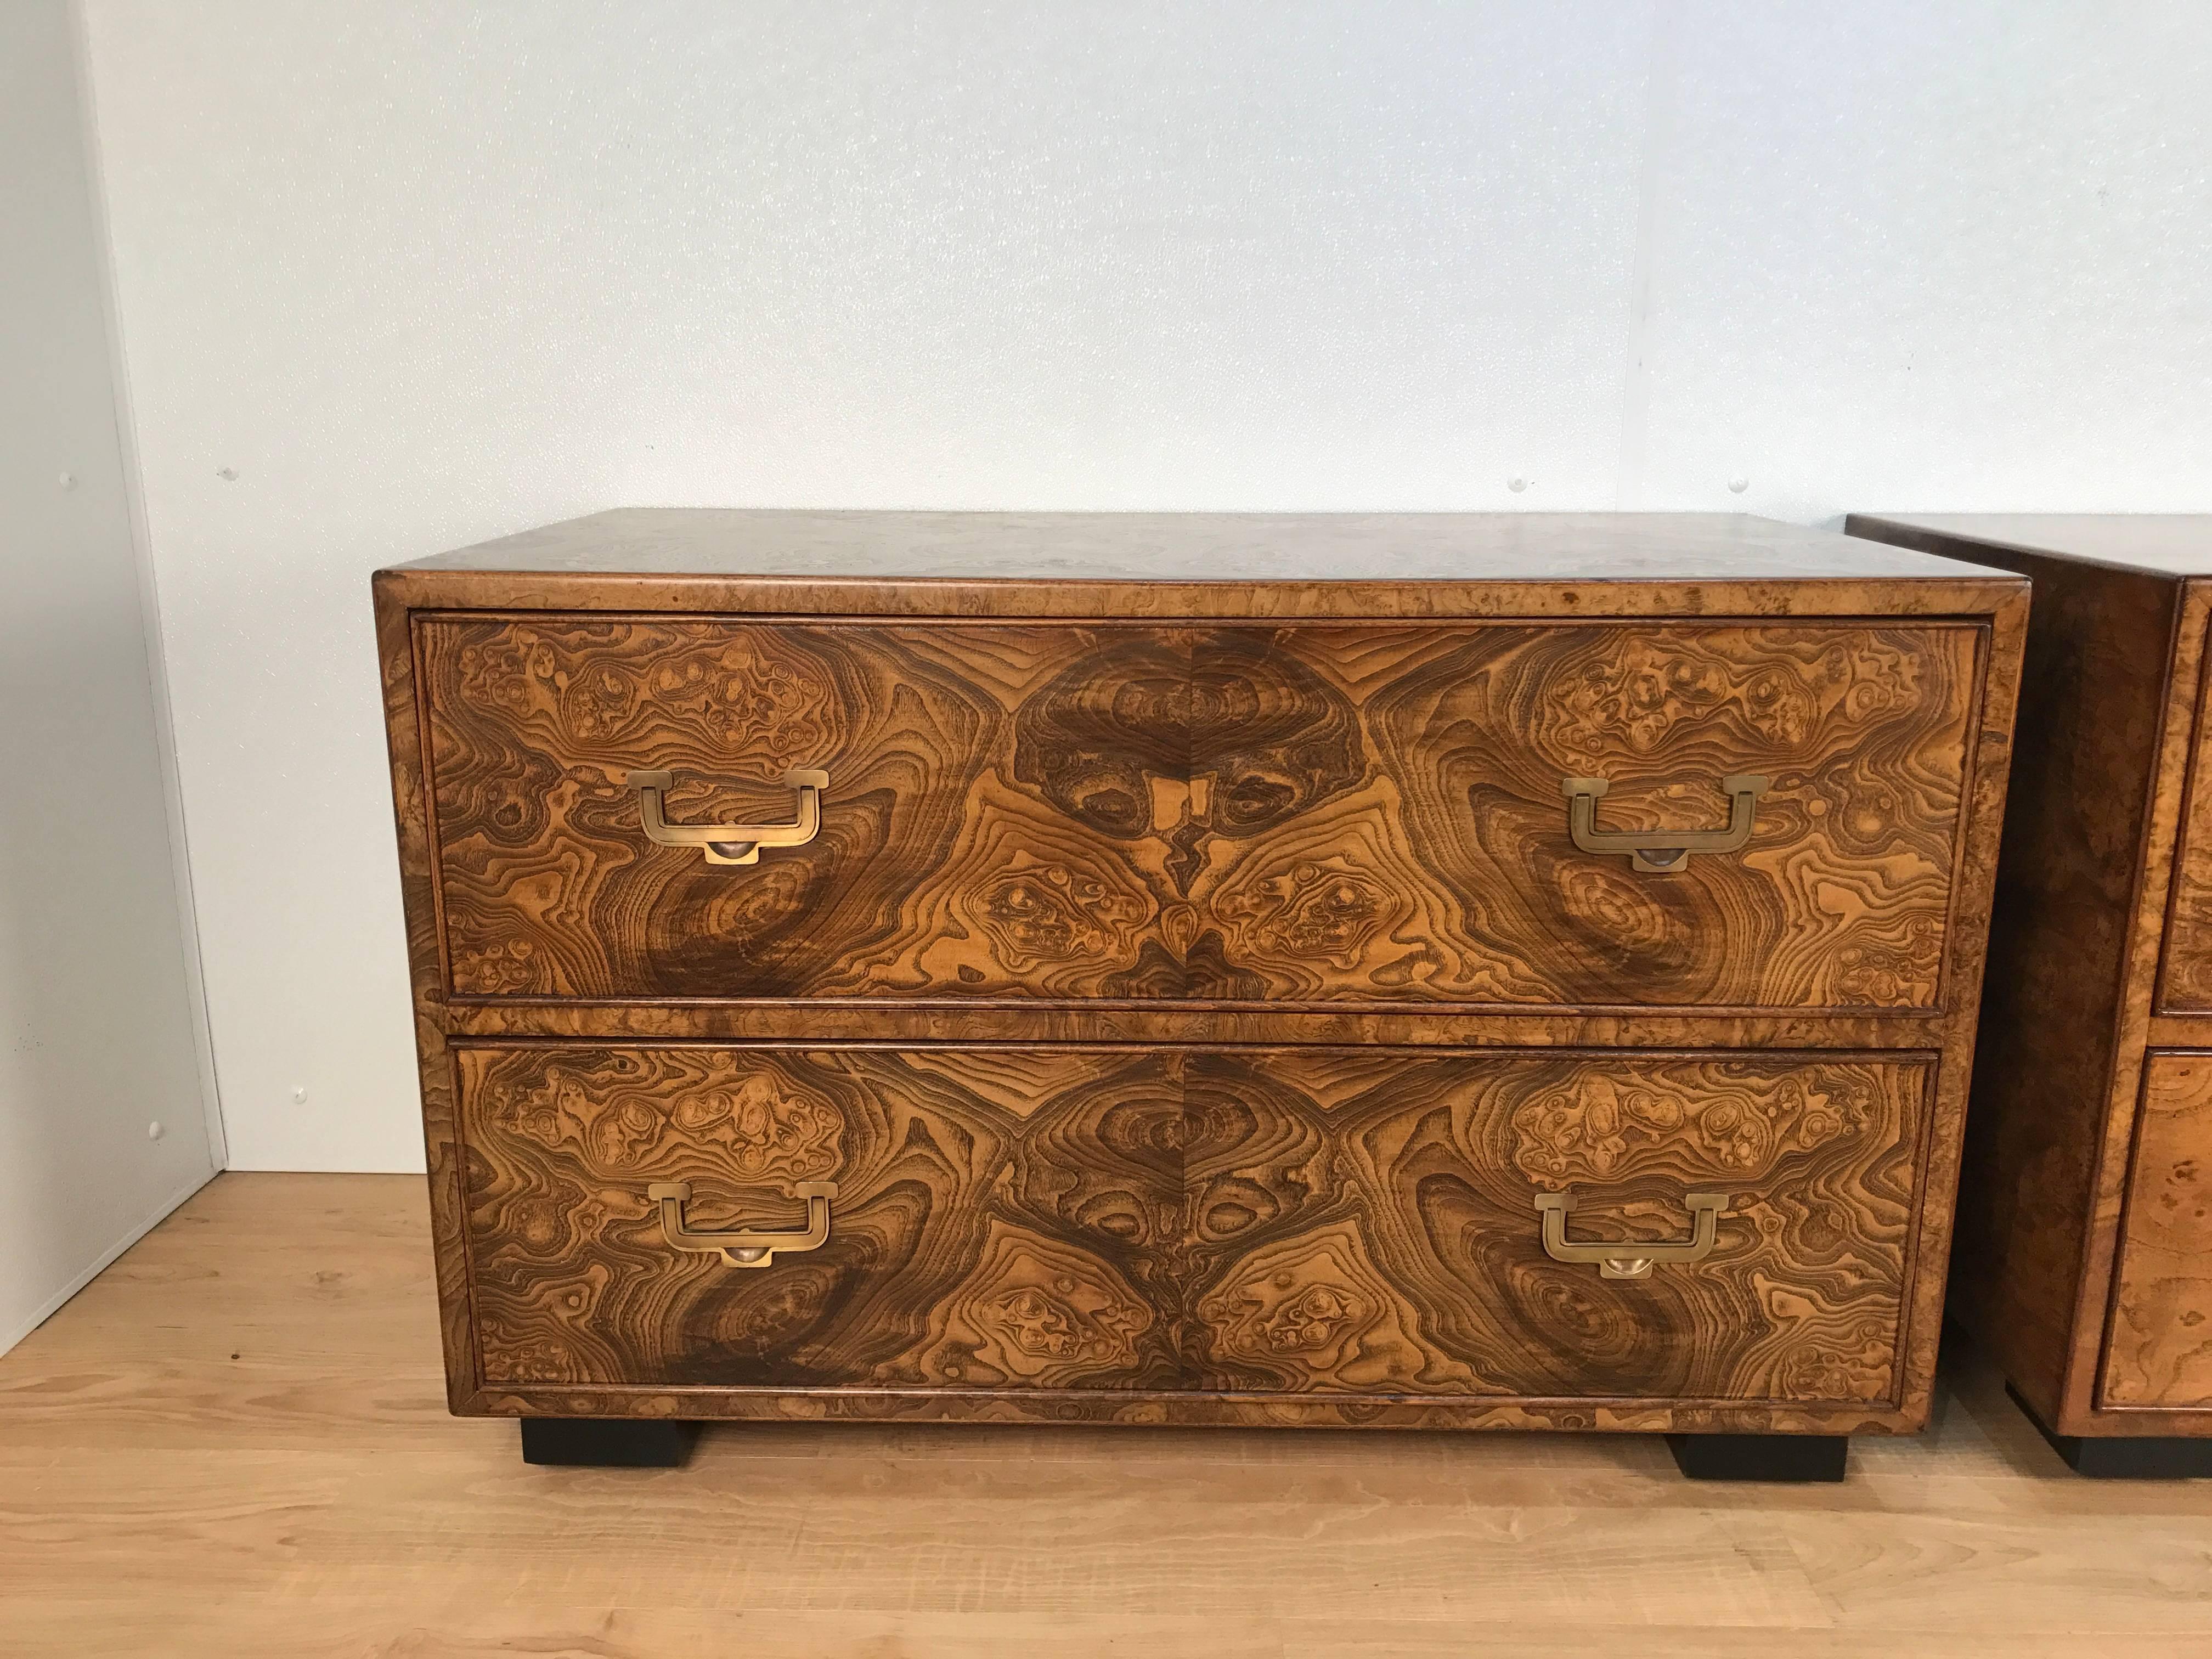 Stunning pair of burl wood campaign style two-drawer chests by John Widdicomb. Very similar, one slightly darker with more wood variations. Presents well together on either side of sofa or bed. 